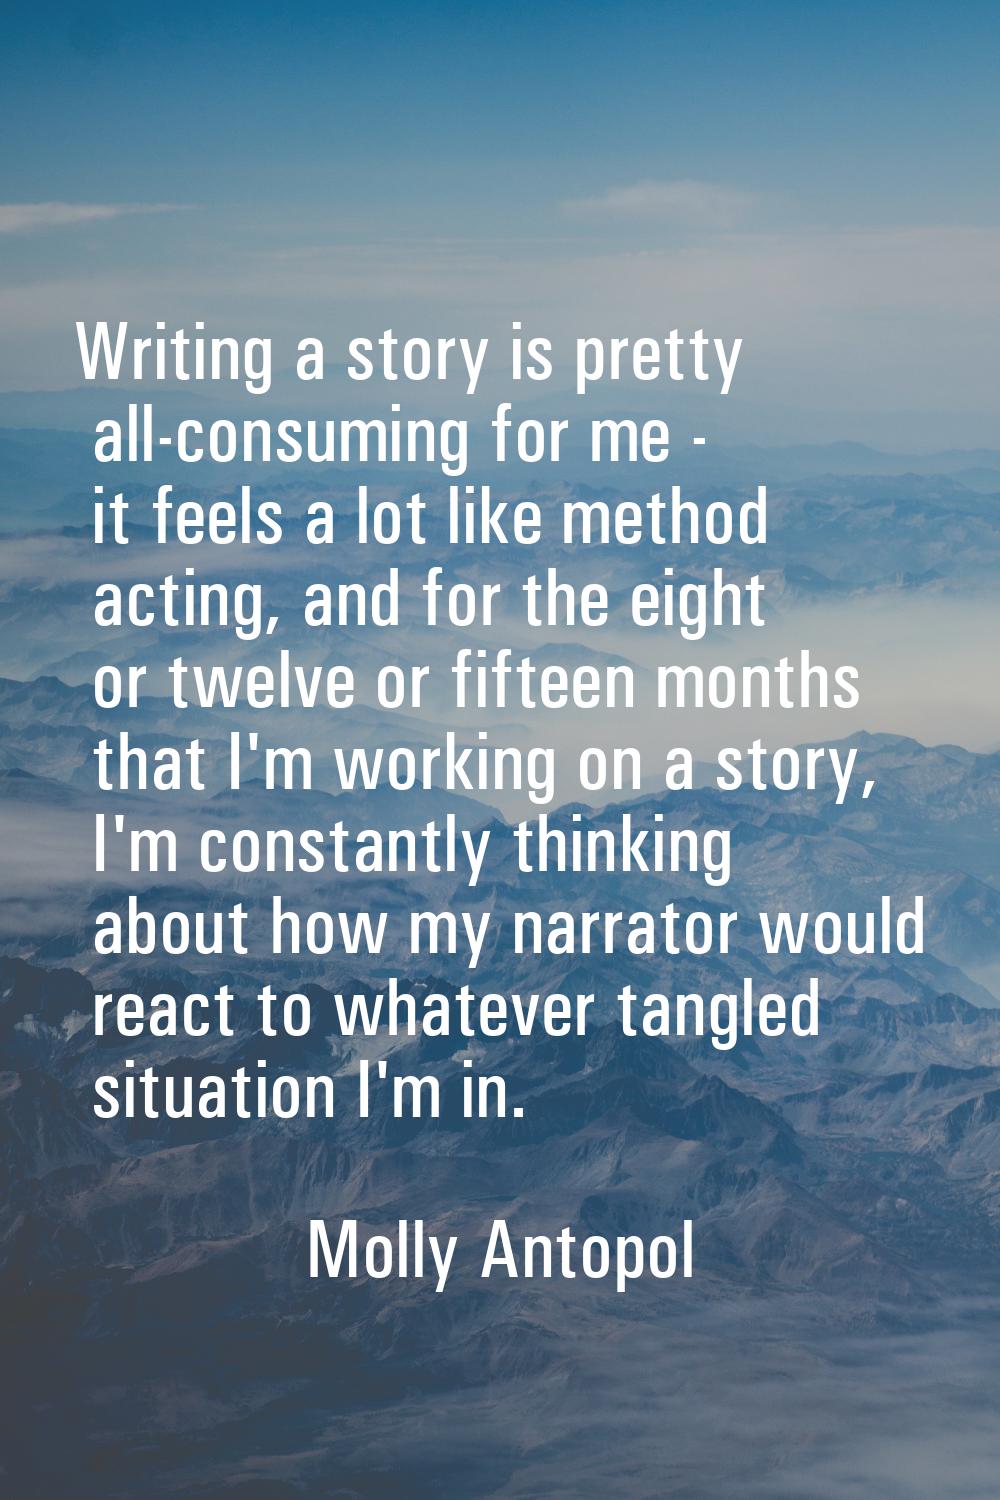 Writing a story is pretty all-consuming for me - it feels a lot like method acting, and for the eig